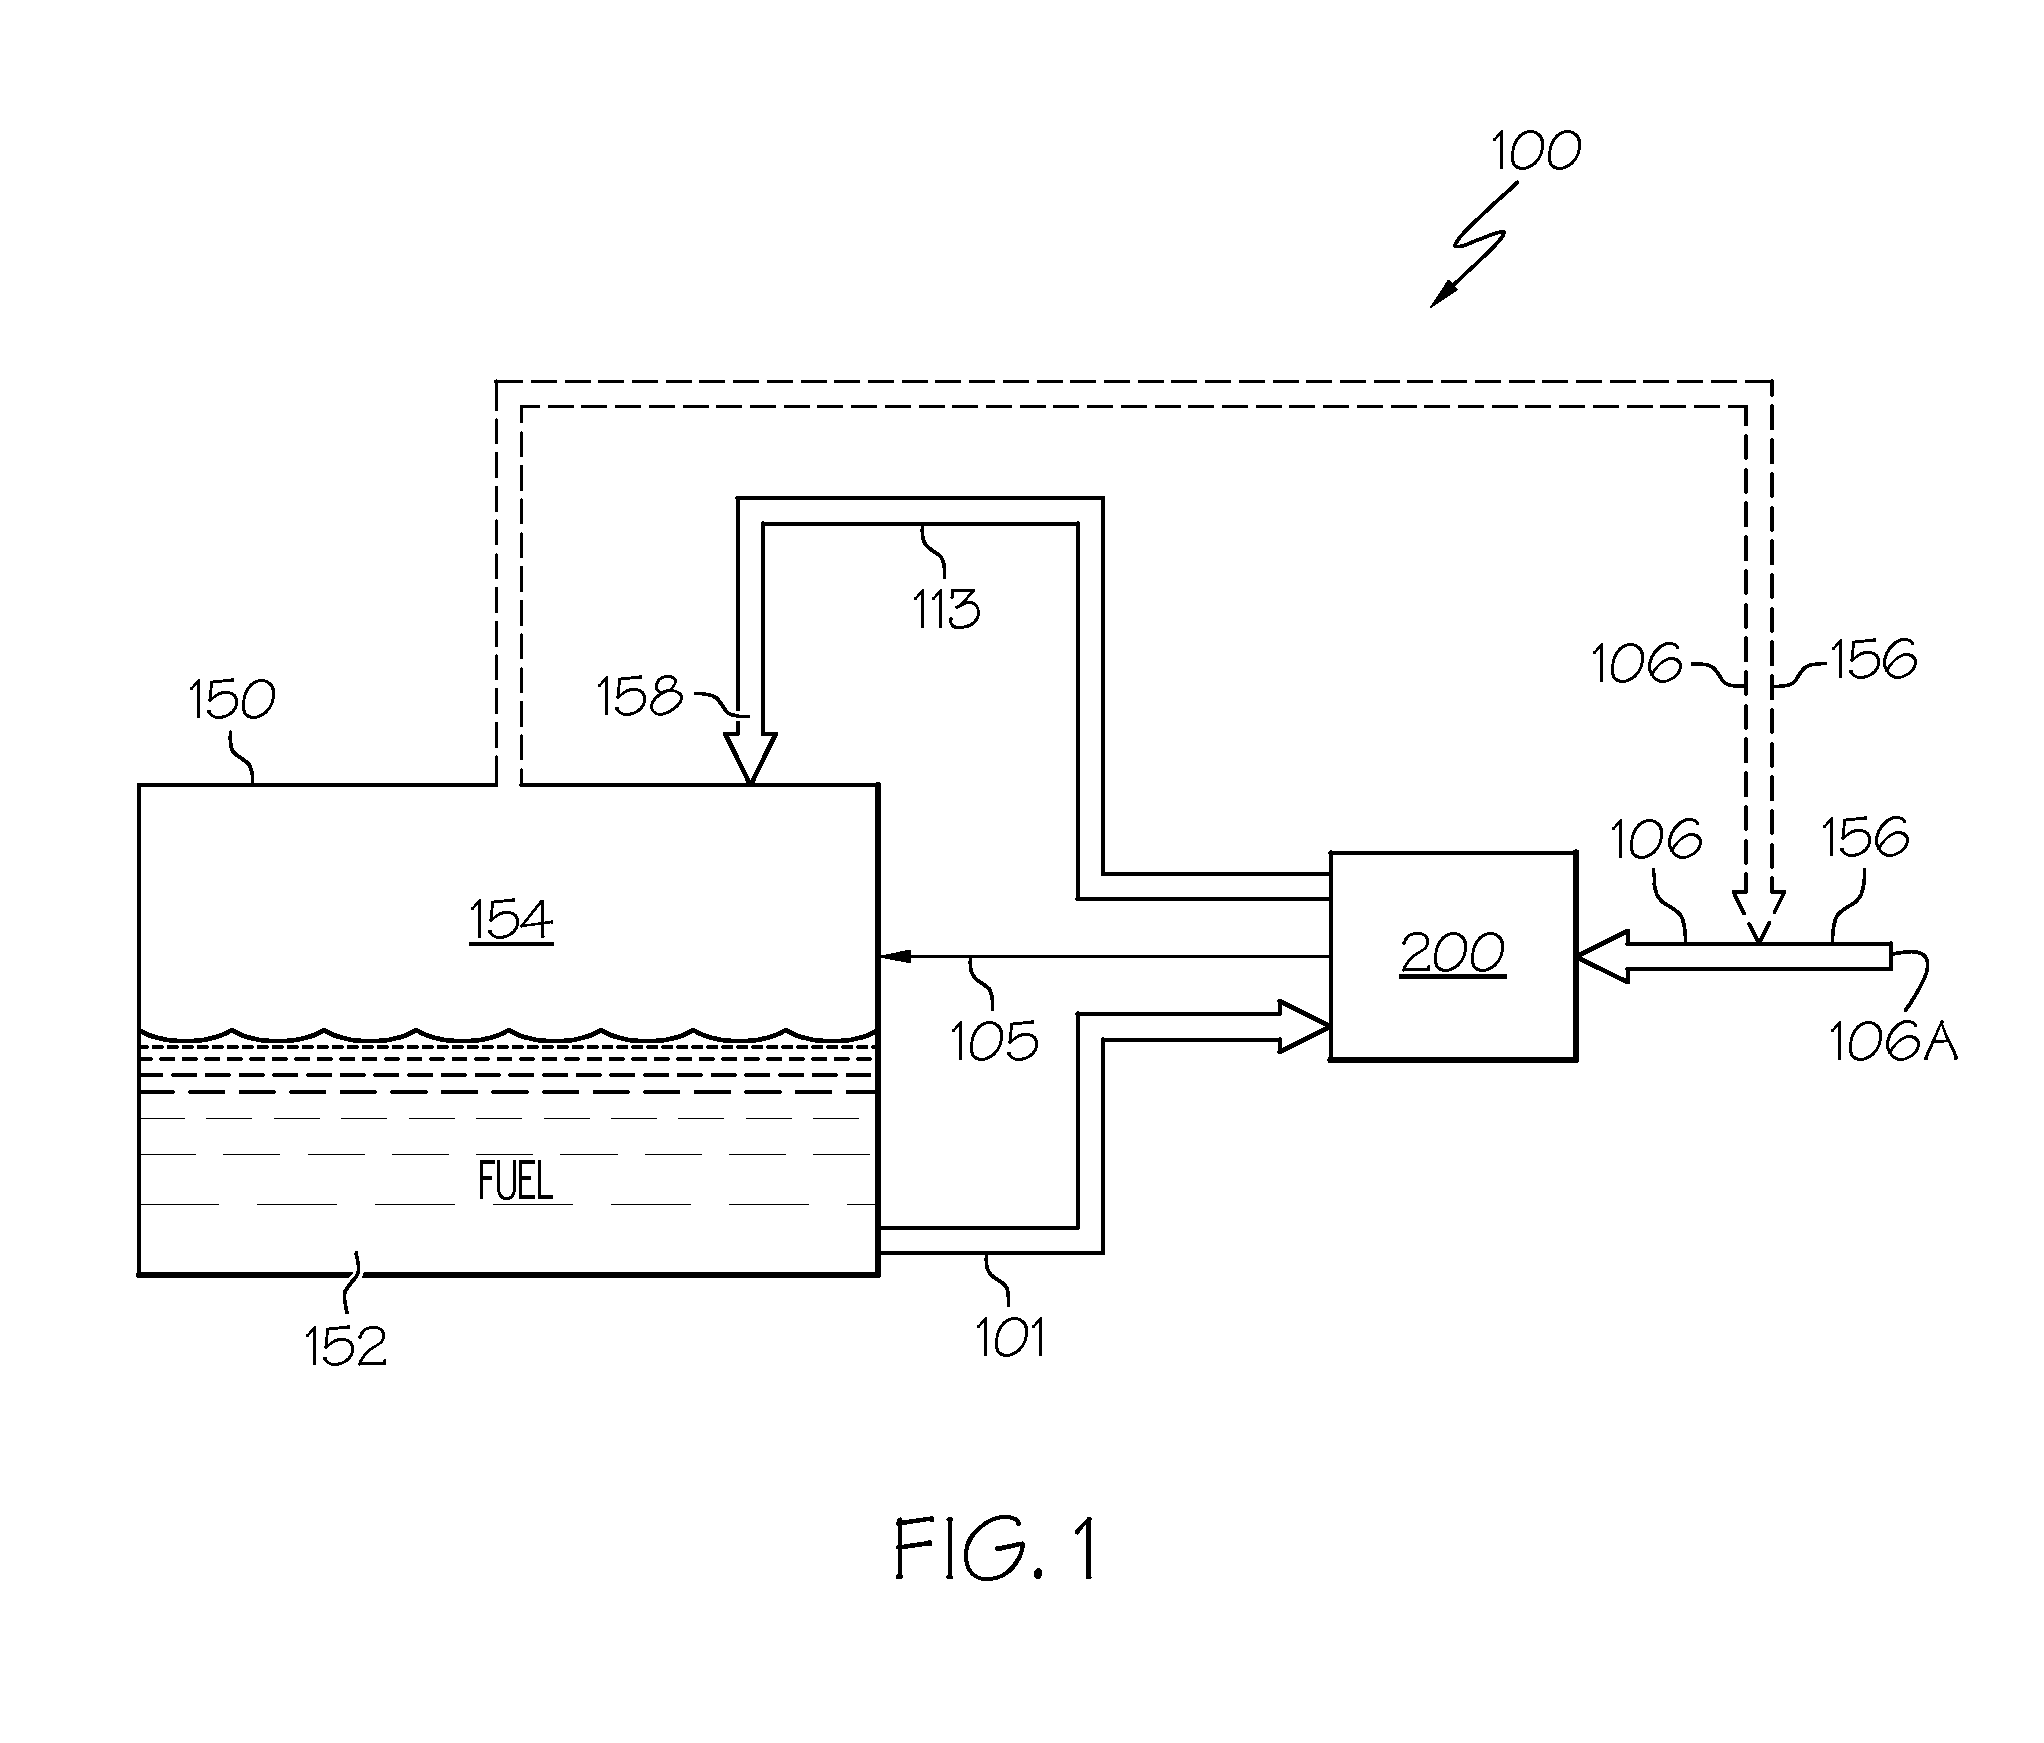 Advanced carbon dioxide fuel tank inerting system